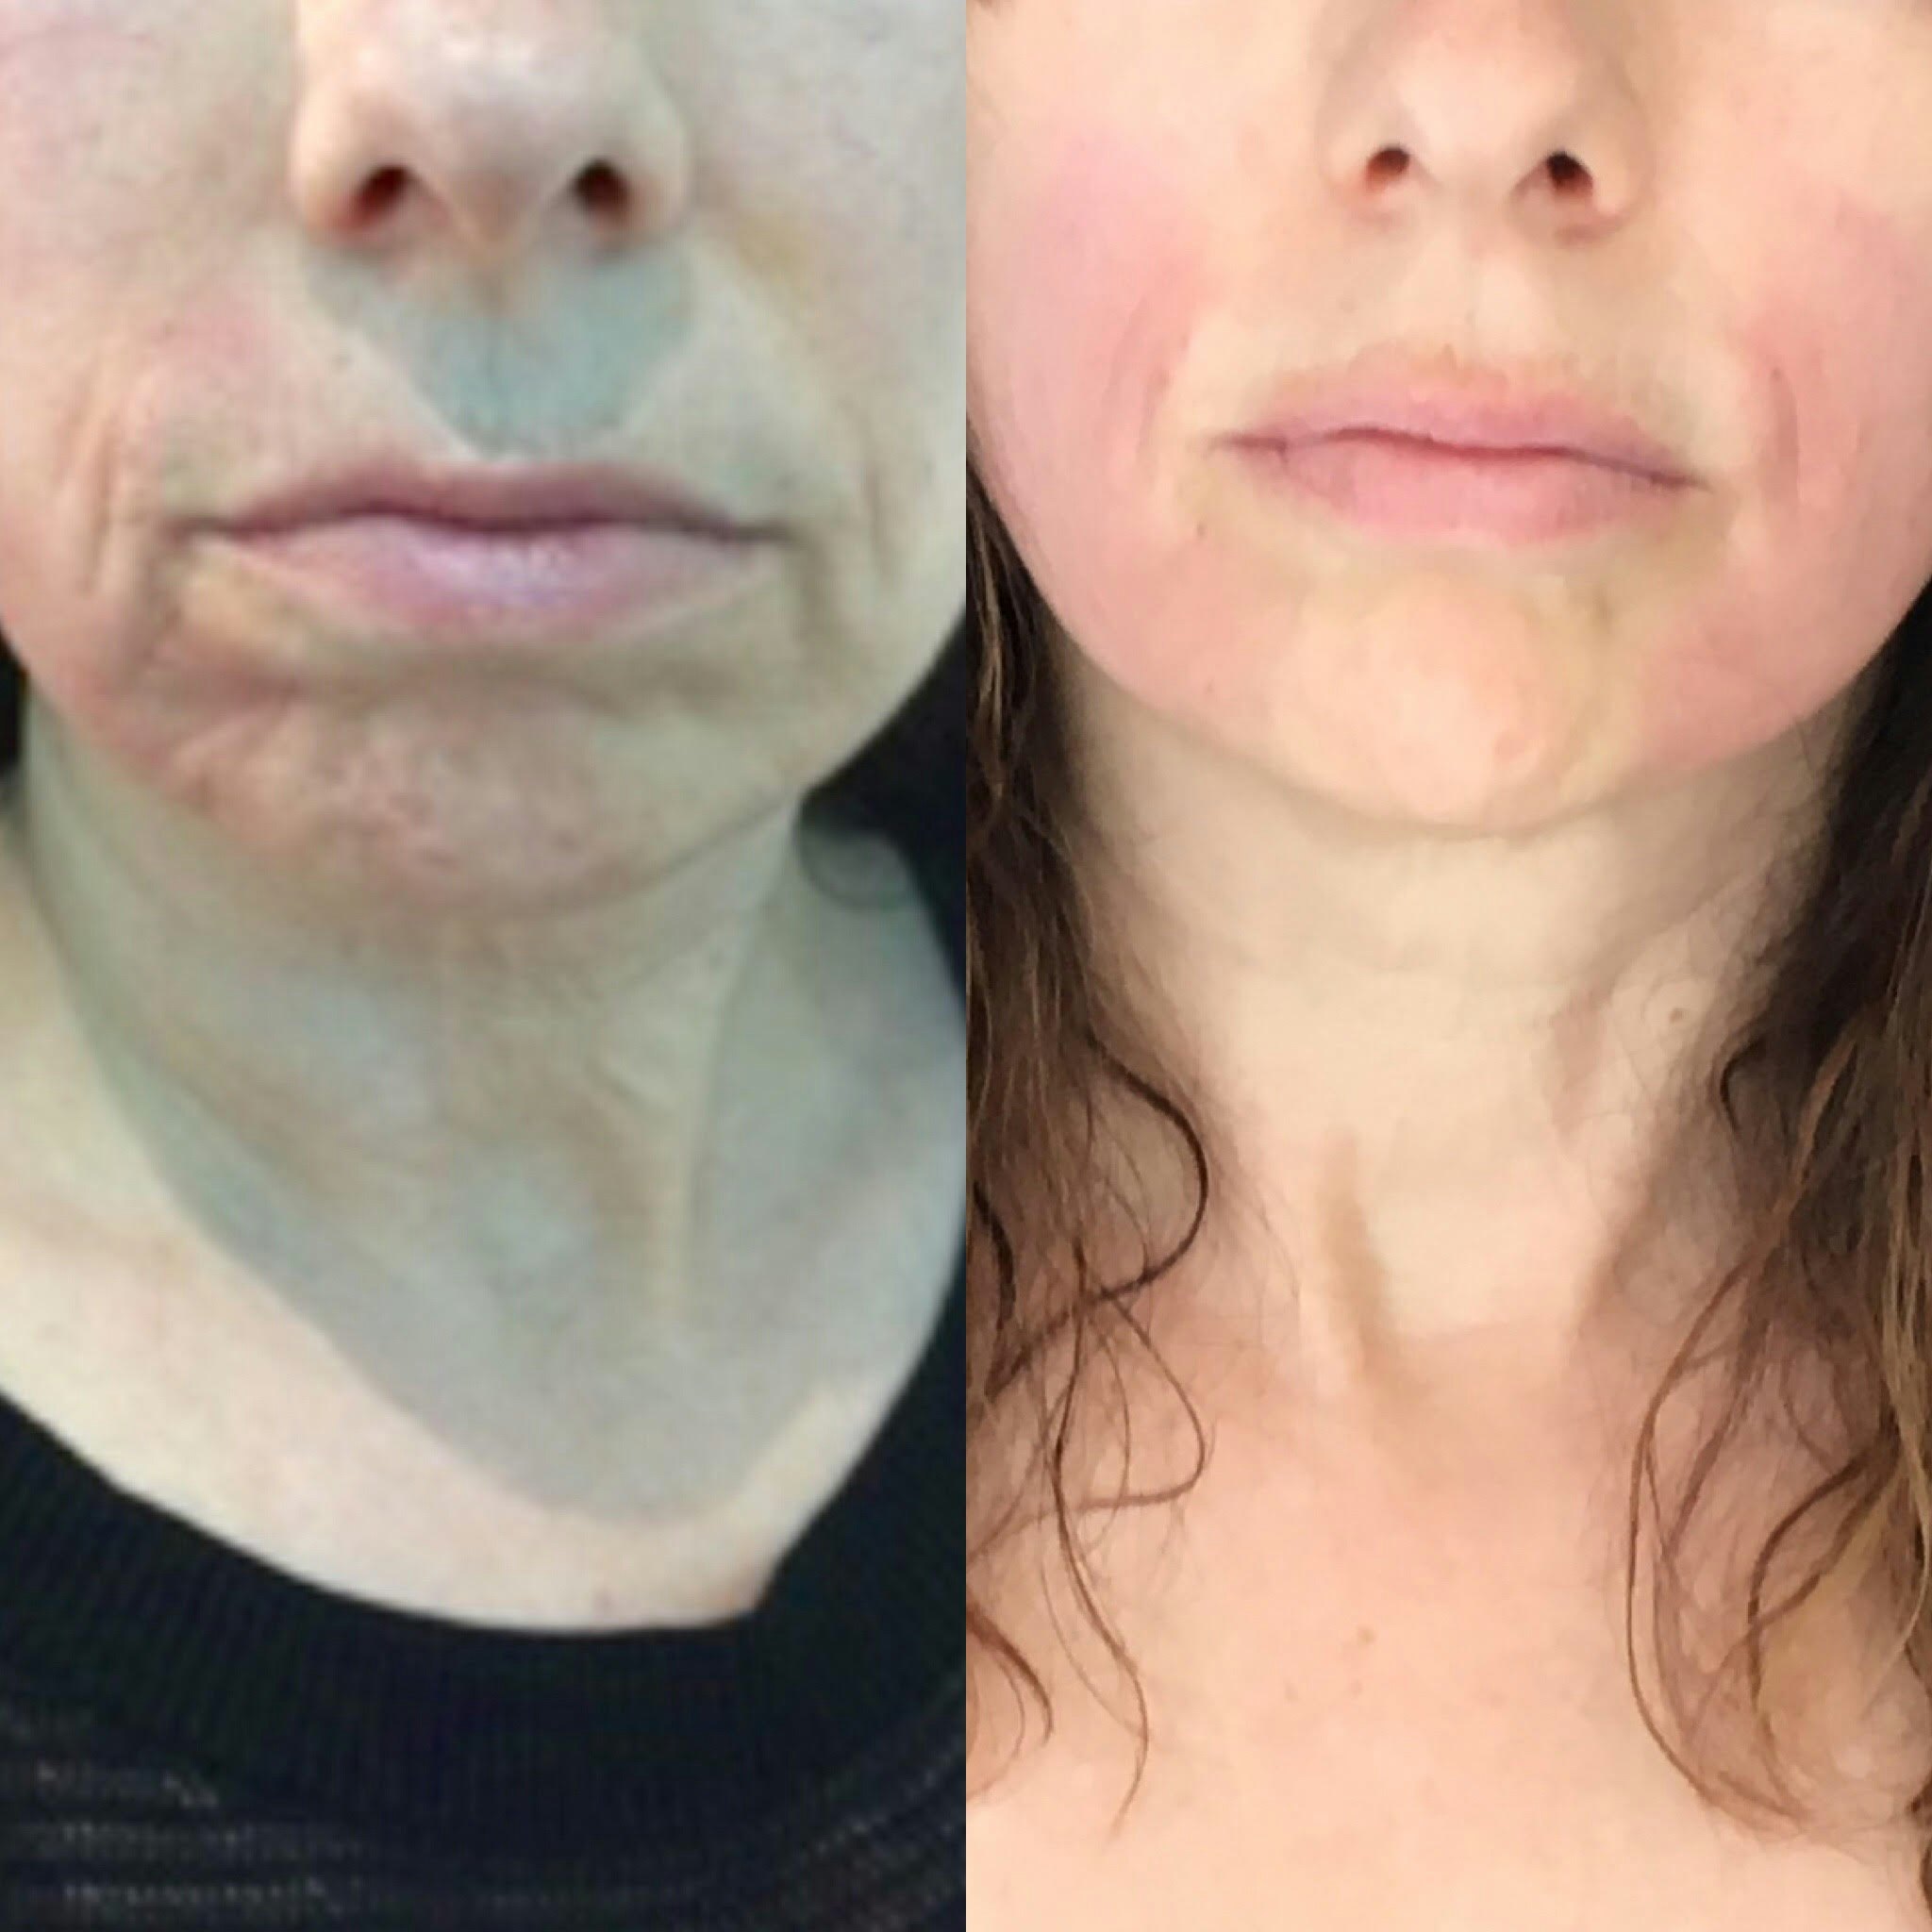 I Tried The Forma Non Surgical Facelift It Completely Sculpted